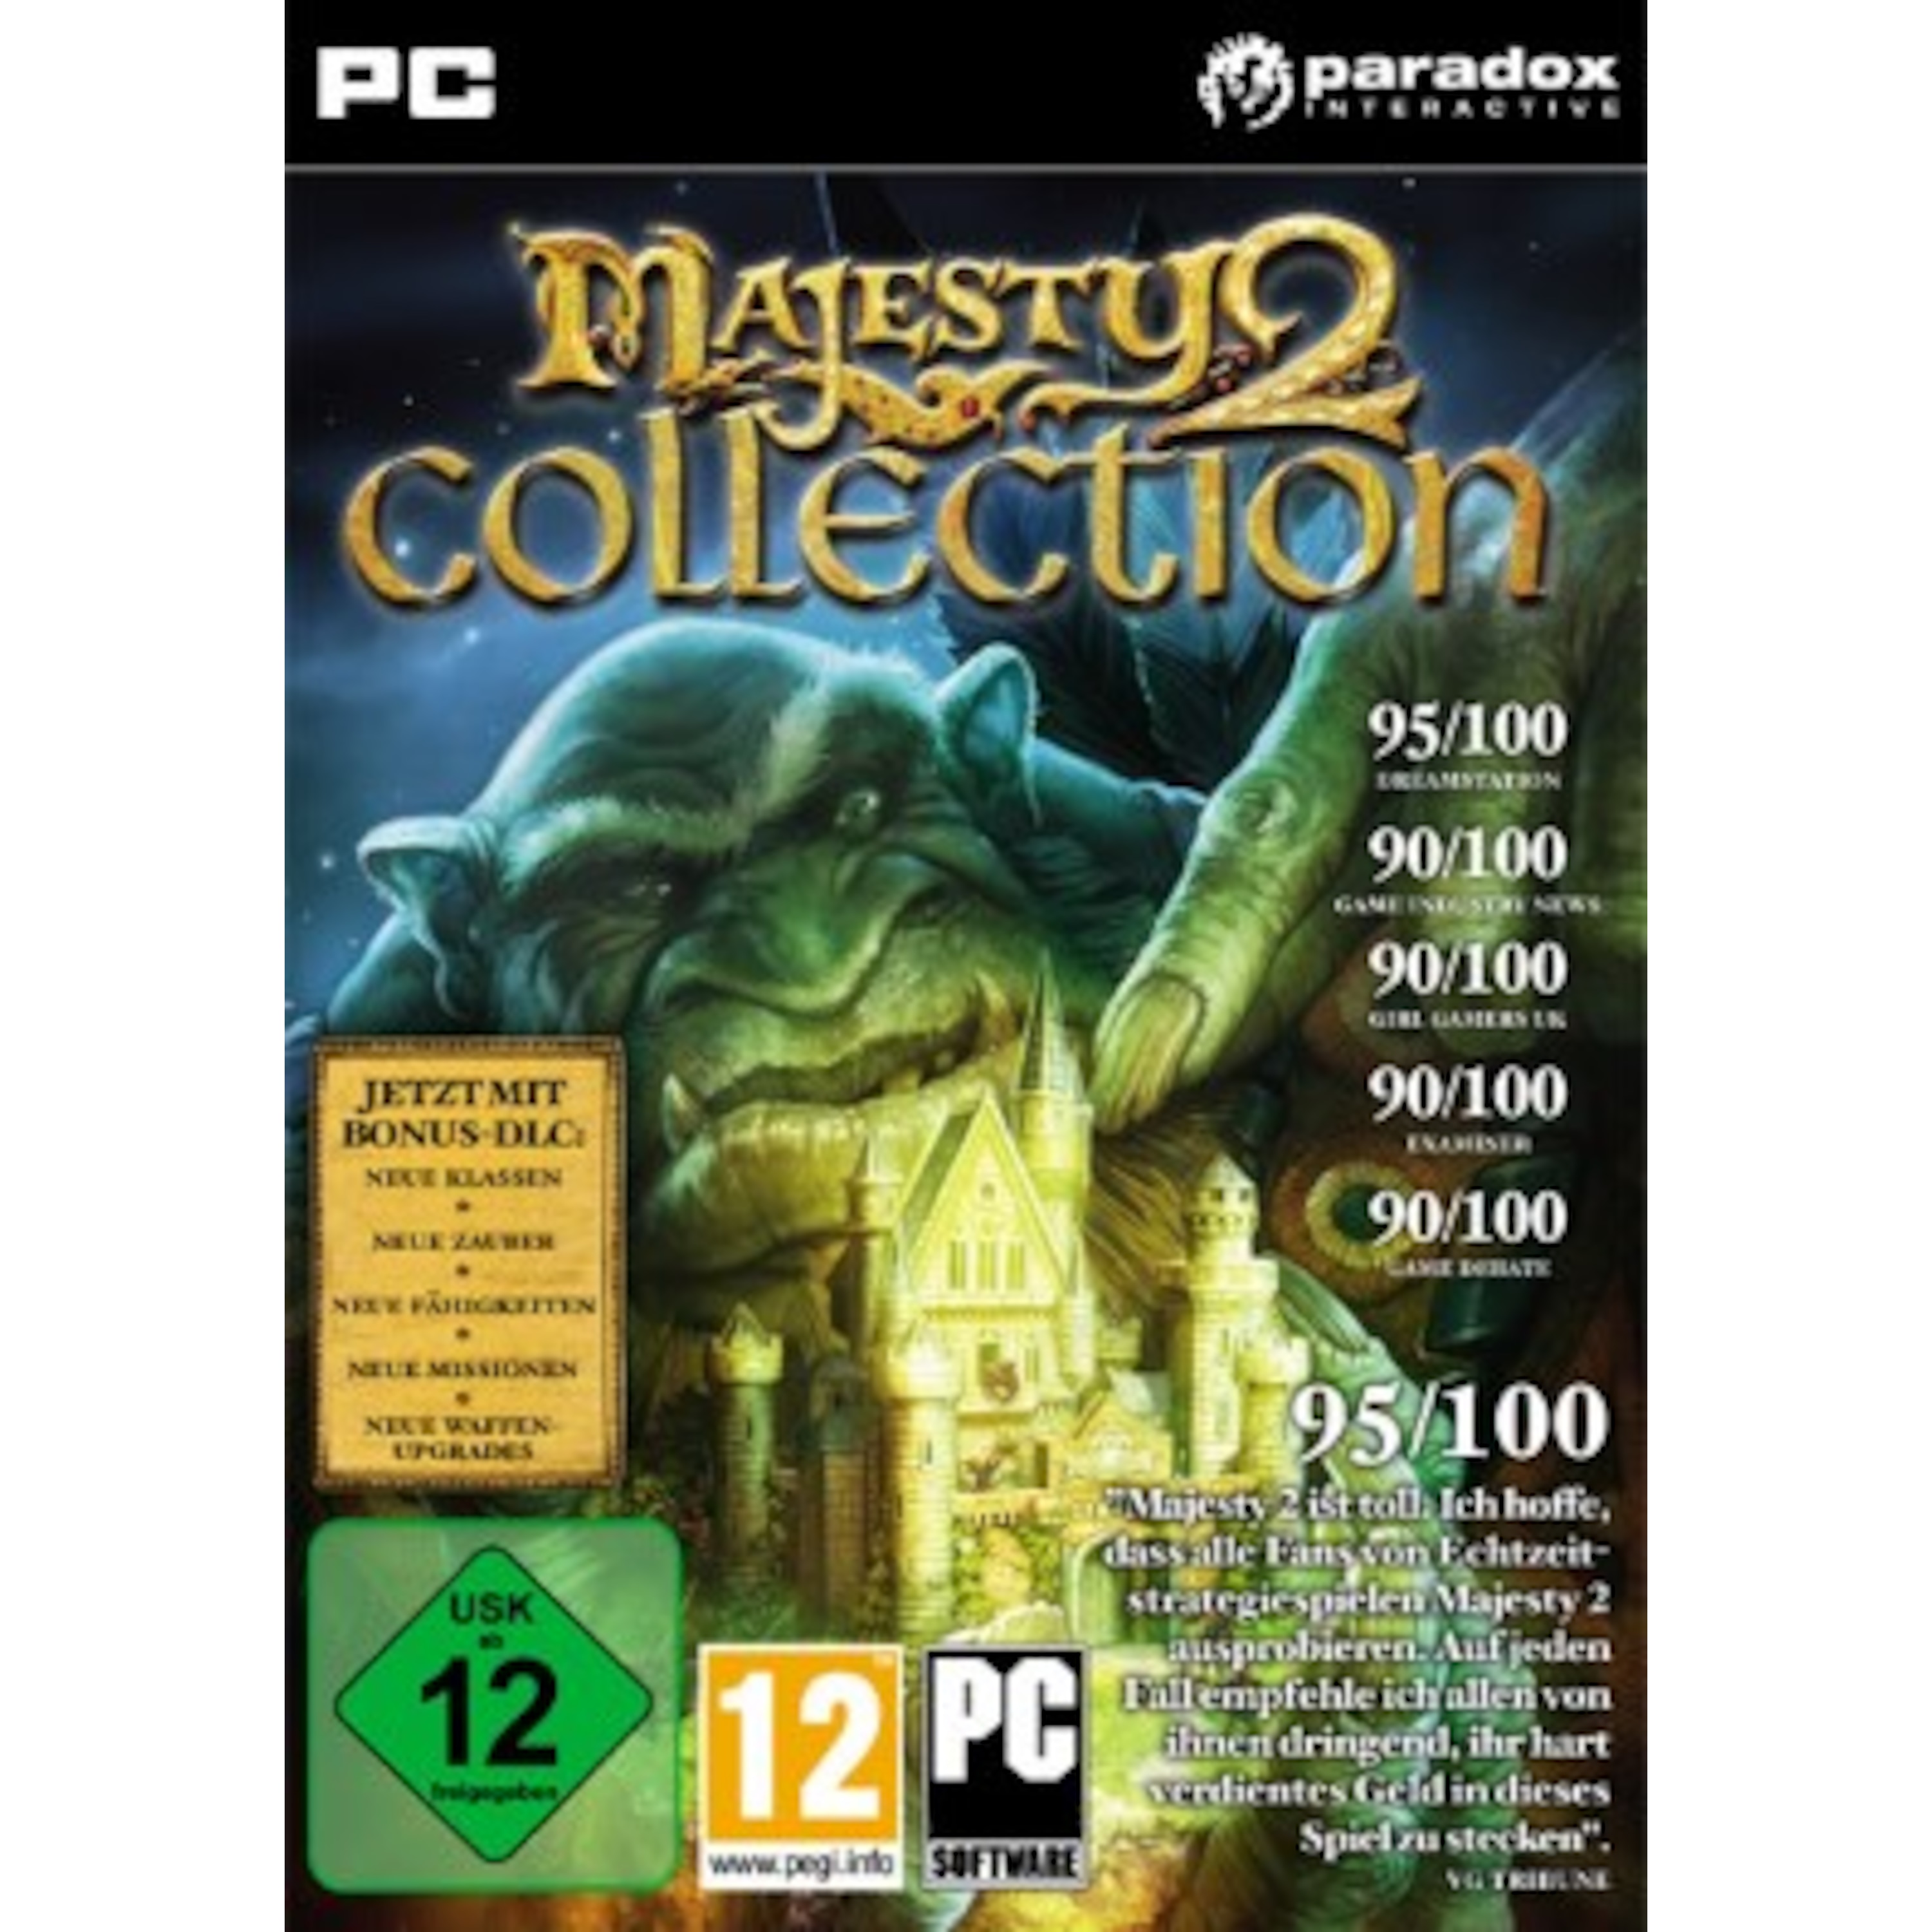 majesty 2 collection saved game missing